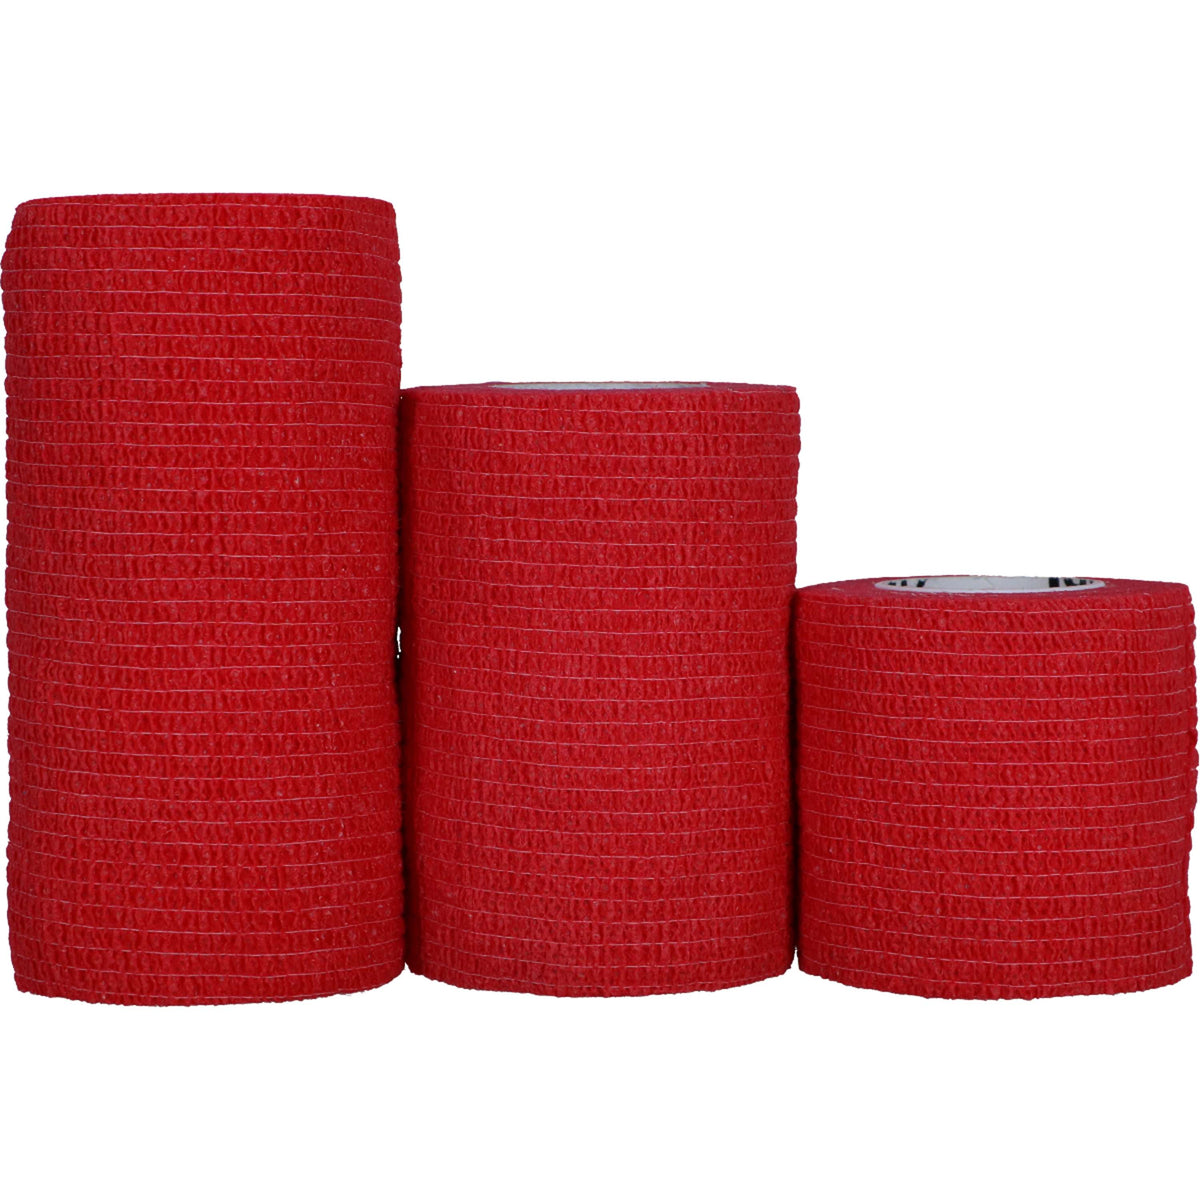 Kerbl EquiLastic Selbsthaftende Bandage 4,5m Rot